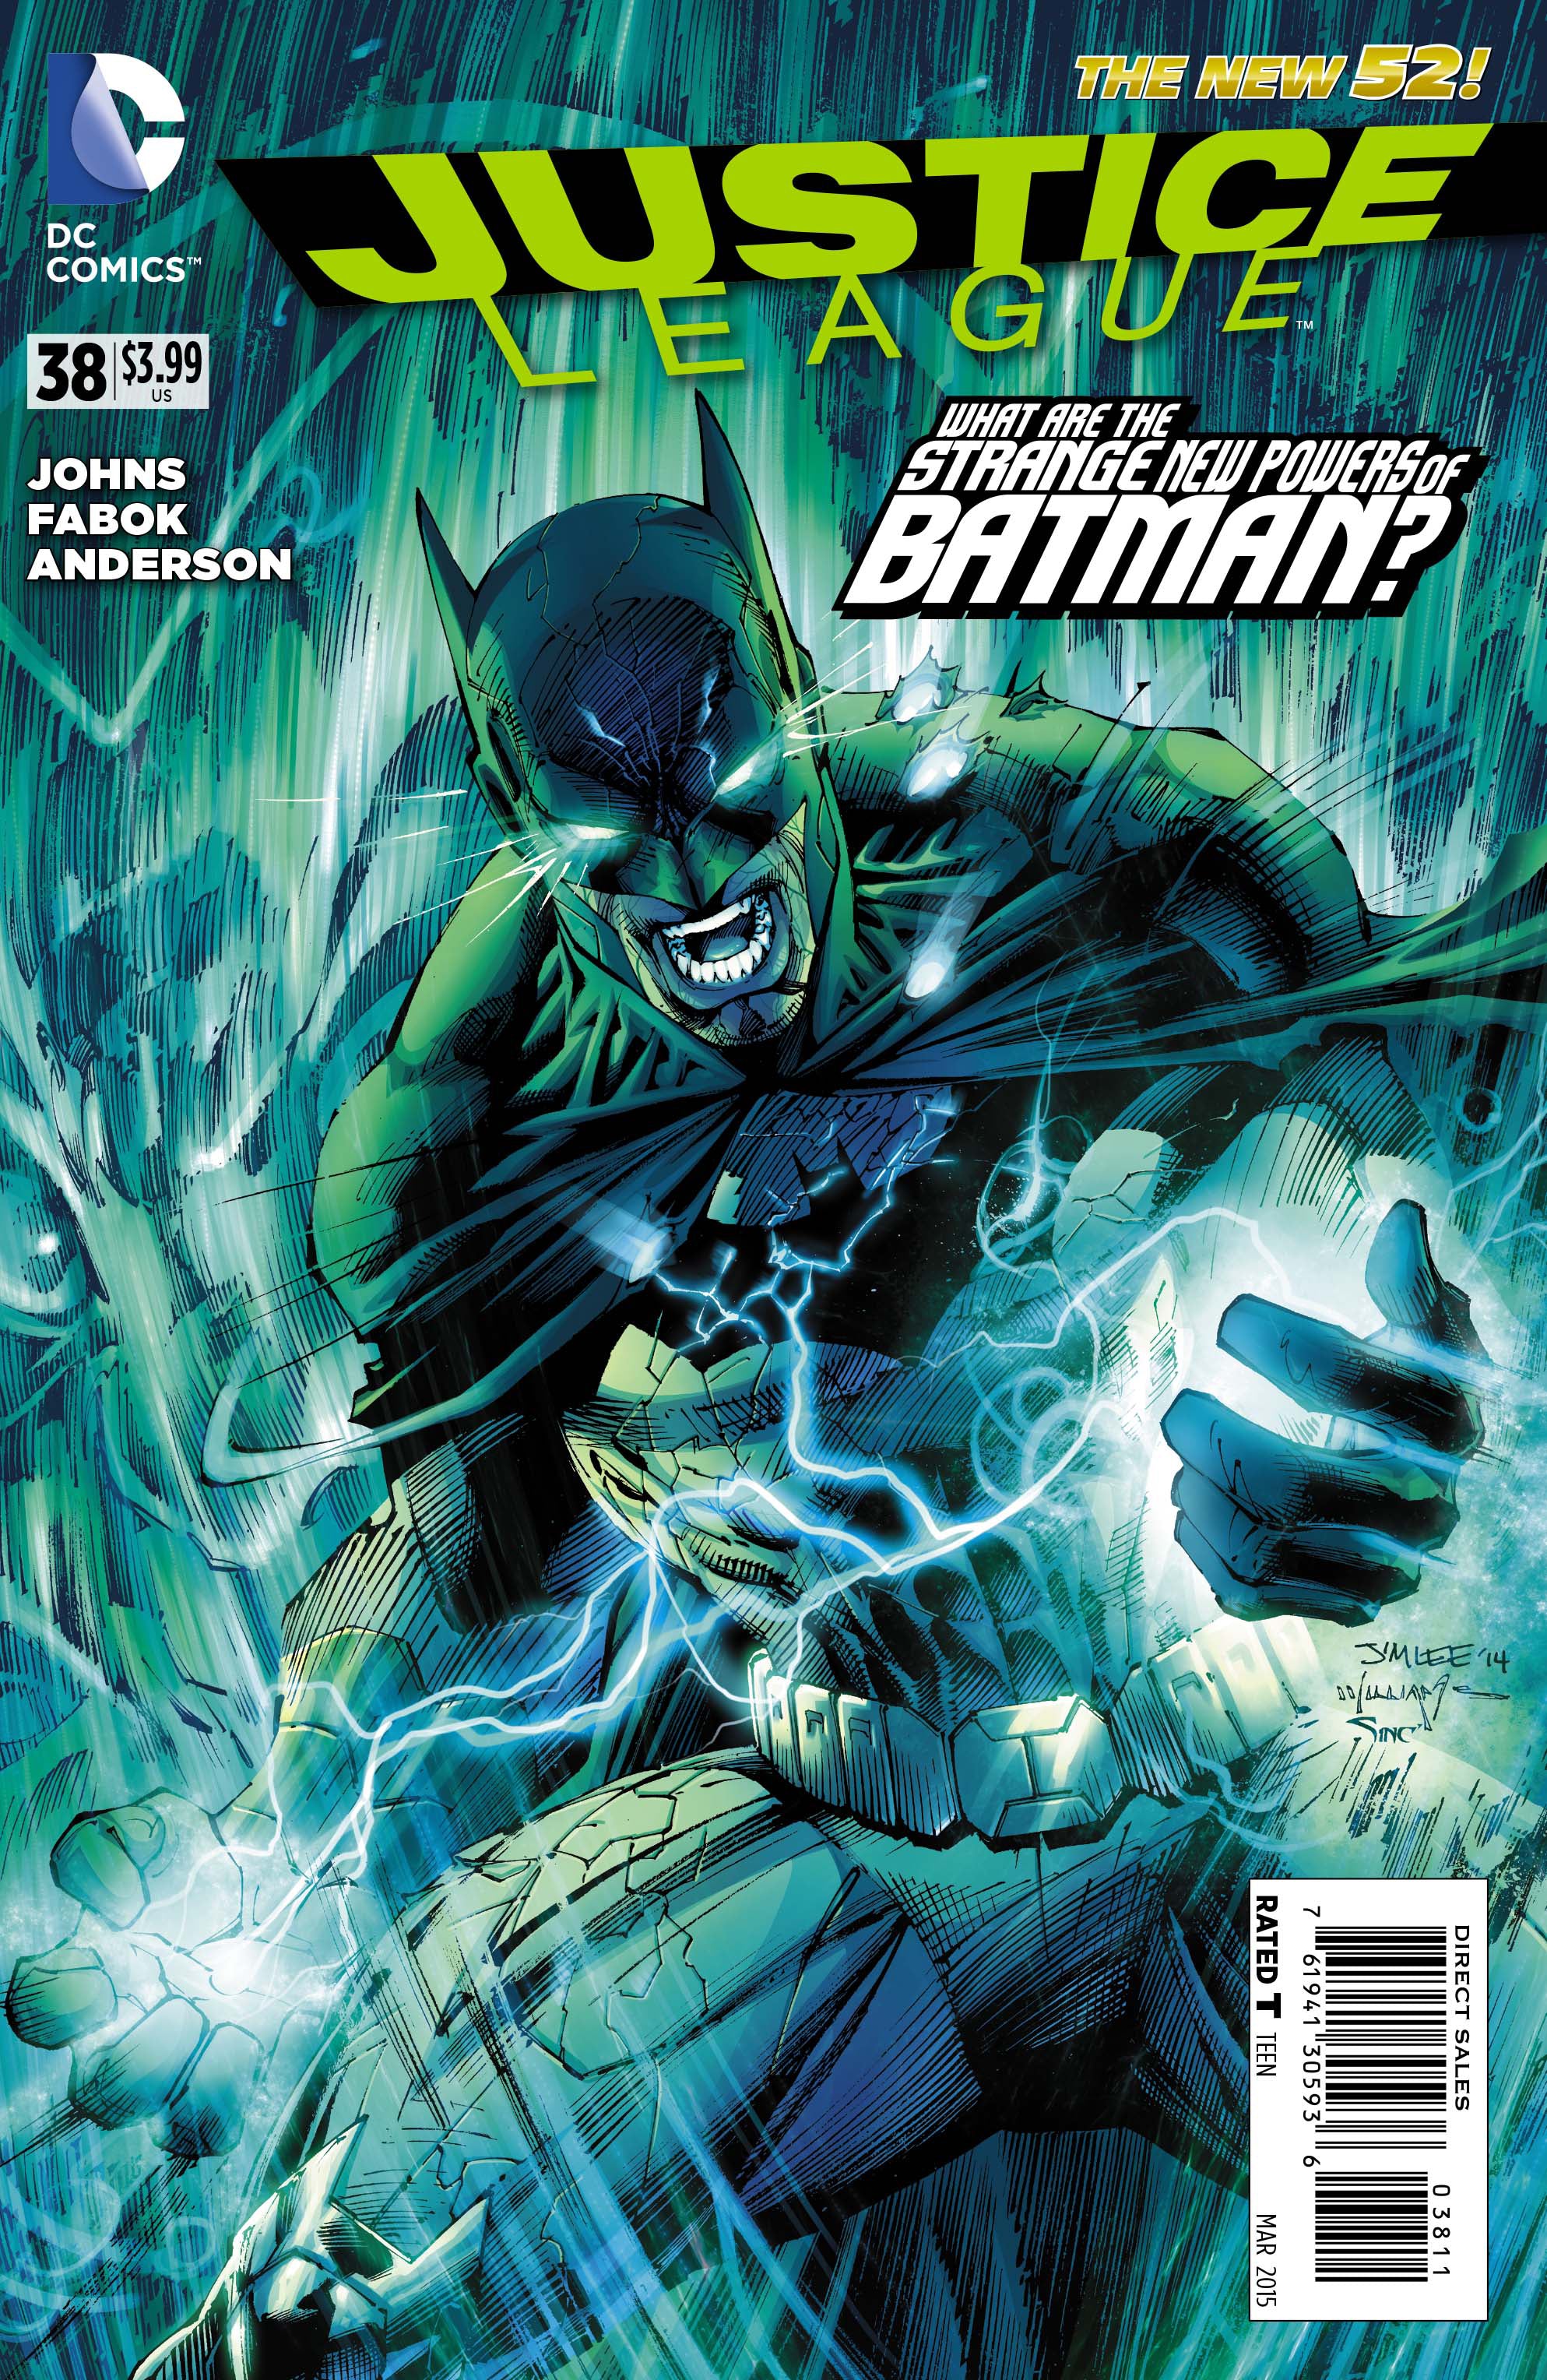 JUSTICE LEAGUE #38 | Game Master's Emporium (The New GME)